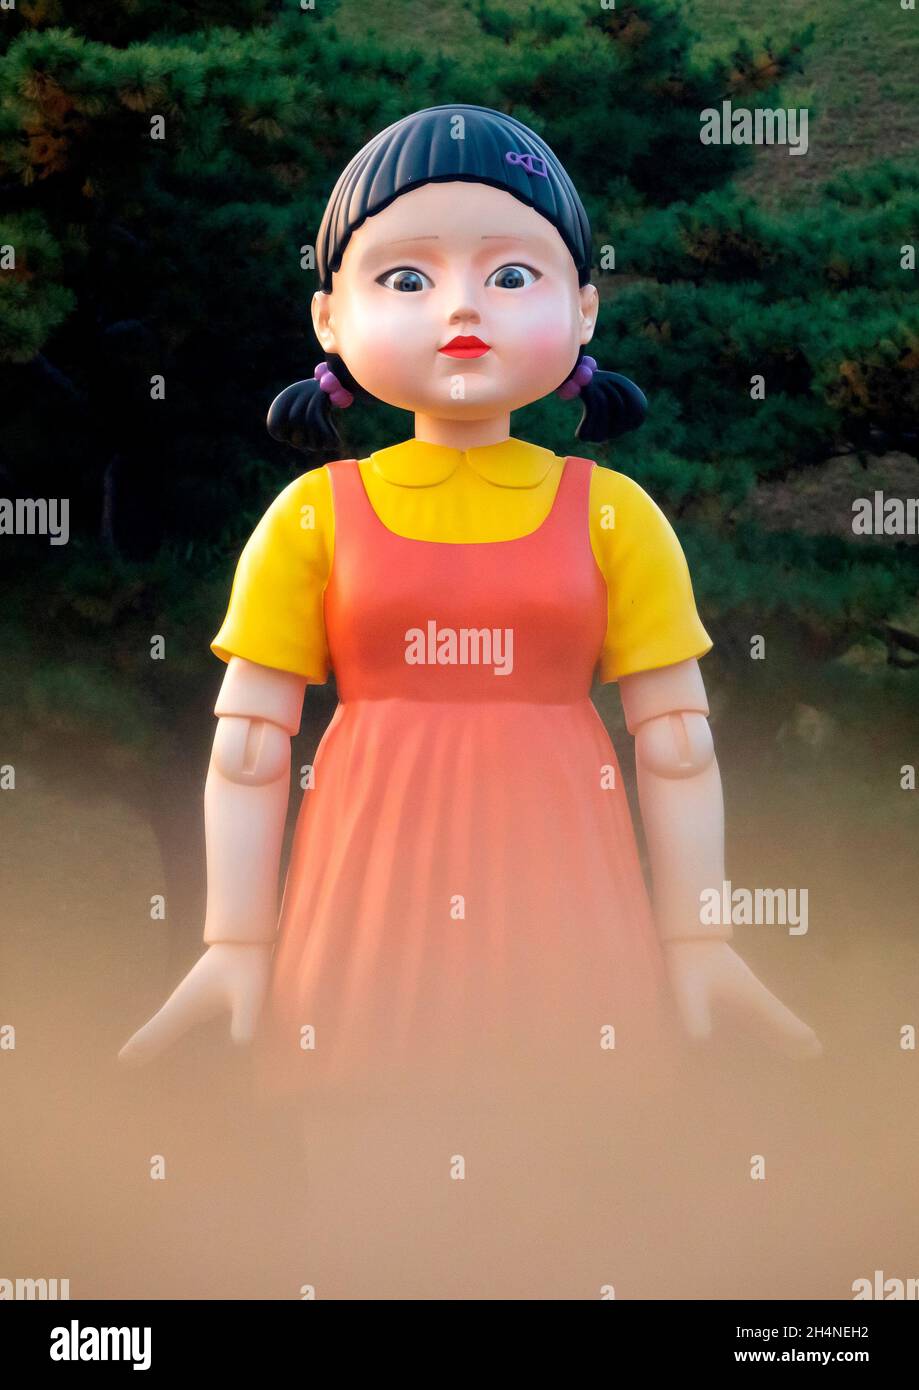 YoungHee, Nov 2, 2021 : A replica of the giant doll called 'YoungHee' which appears in Netflix series 'Squid Game' is displayed at the Olympic Park in Seoul, South Korea. Credit: Lee Jae-Won/AFLO/Alamy Live News Stock Photo